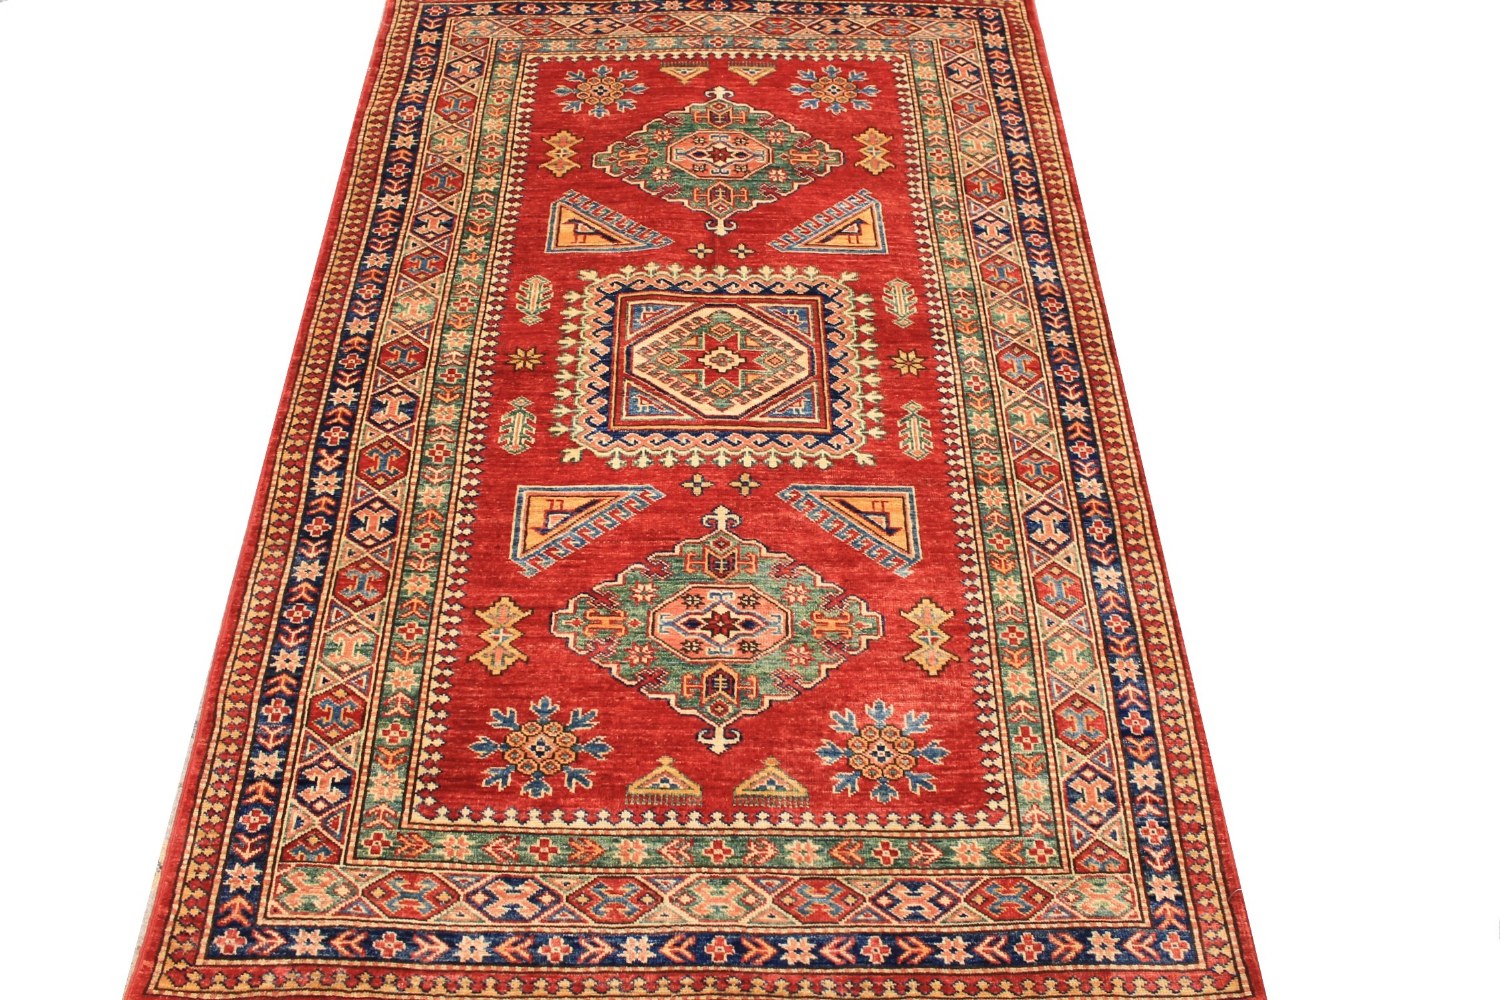 4x6 Kazak Hand Knotted Wool Area Rug - MR026176